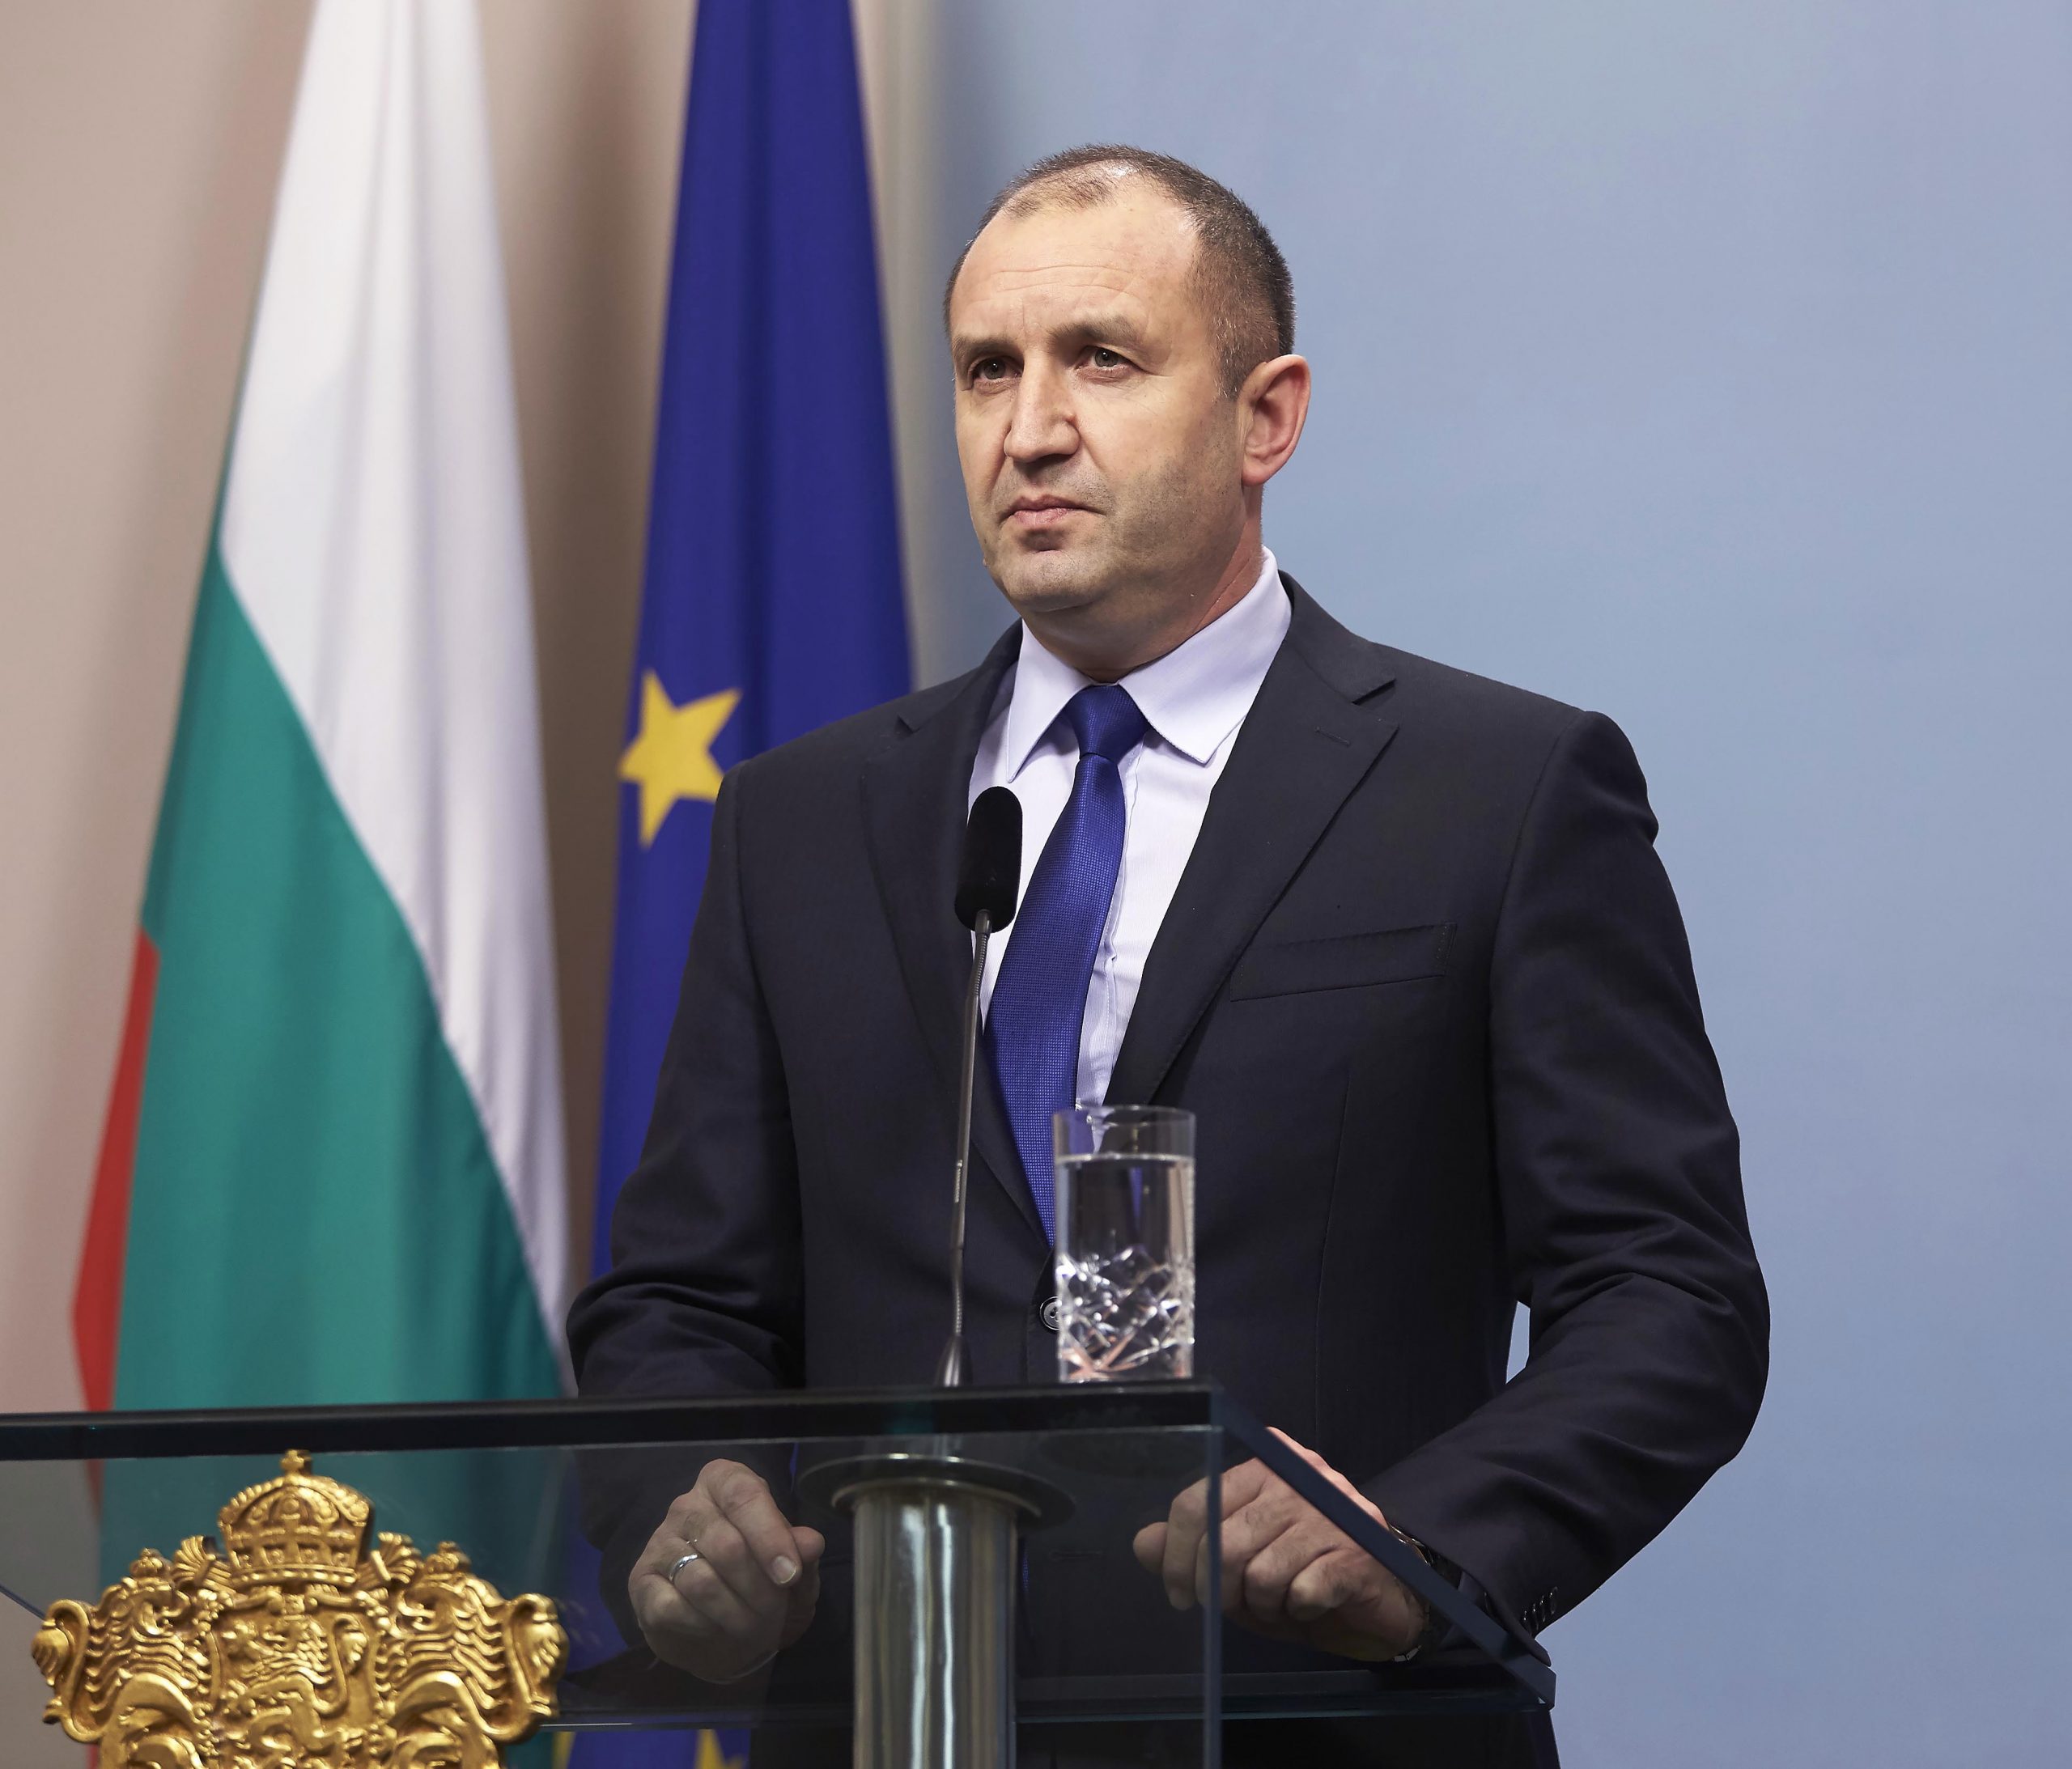 Bulgaria’s President: The Topic Of Ukraine Is Exploited By Those In Power As A Lifeline